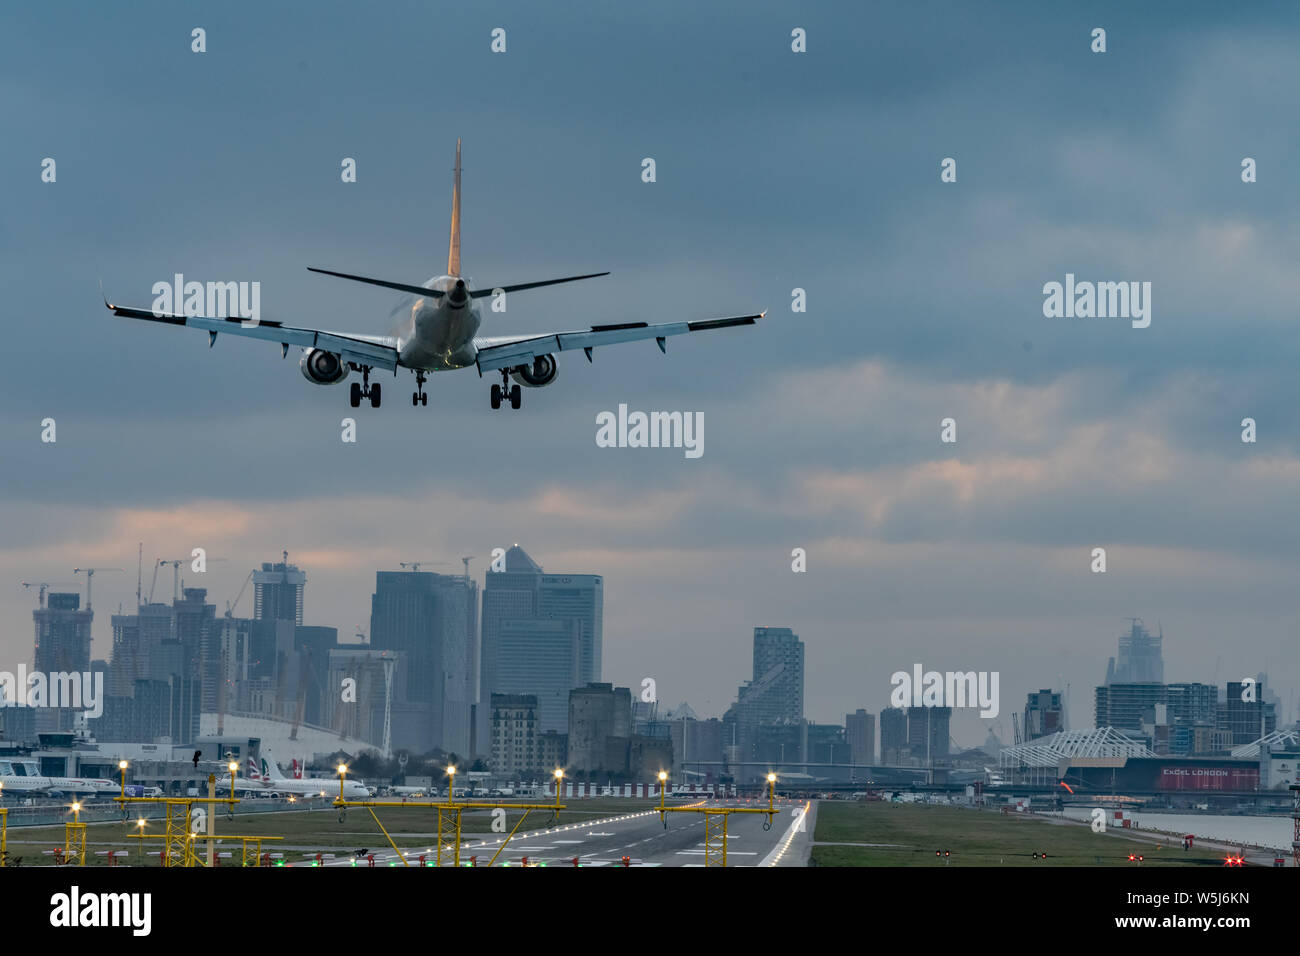 London, UK - 17, February 2019: Embraer E-Jet family series of narrow-body short to medium range twin-engine jet airliner landing at the London City A Stock Photo